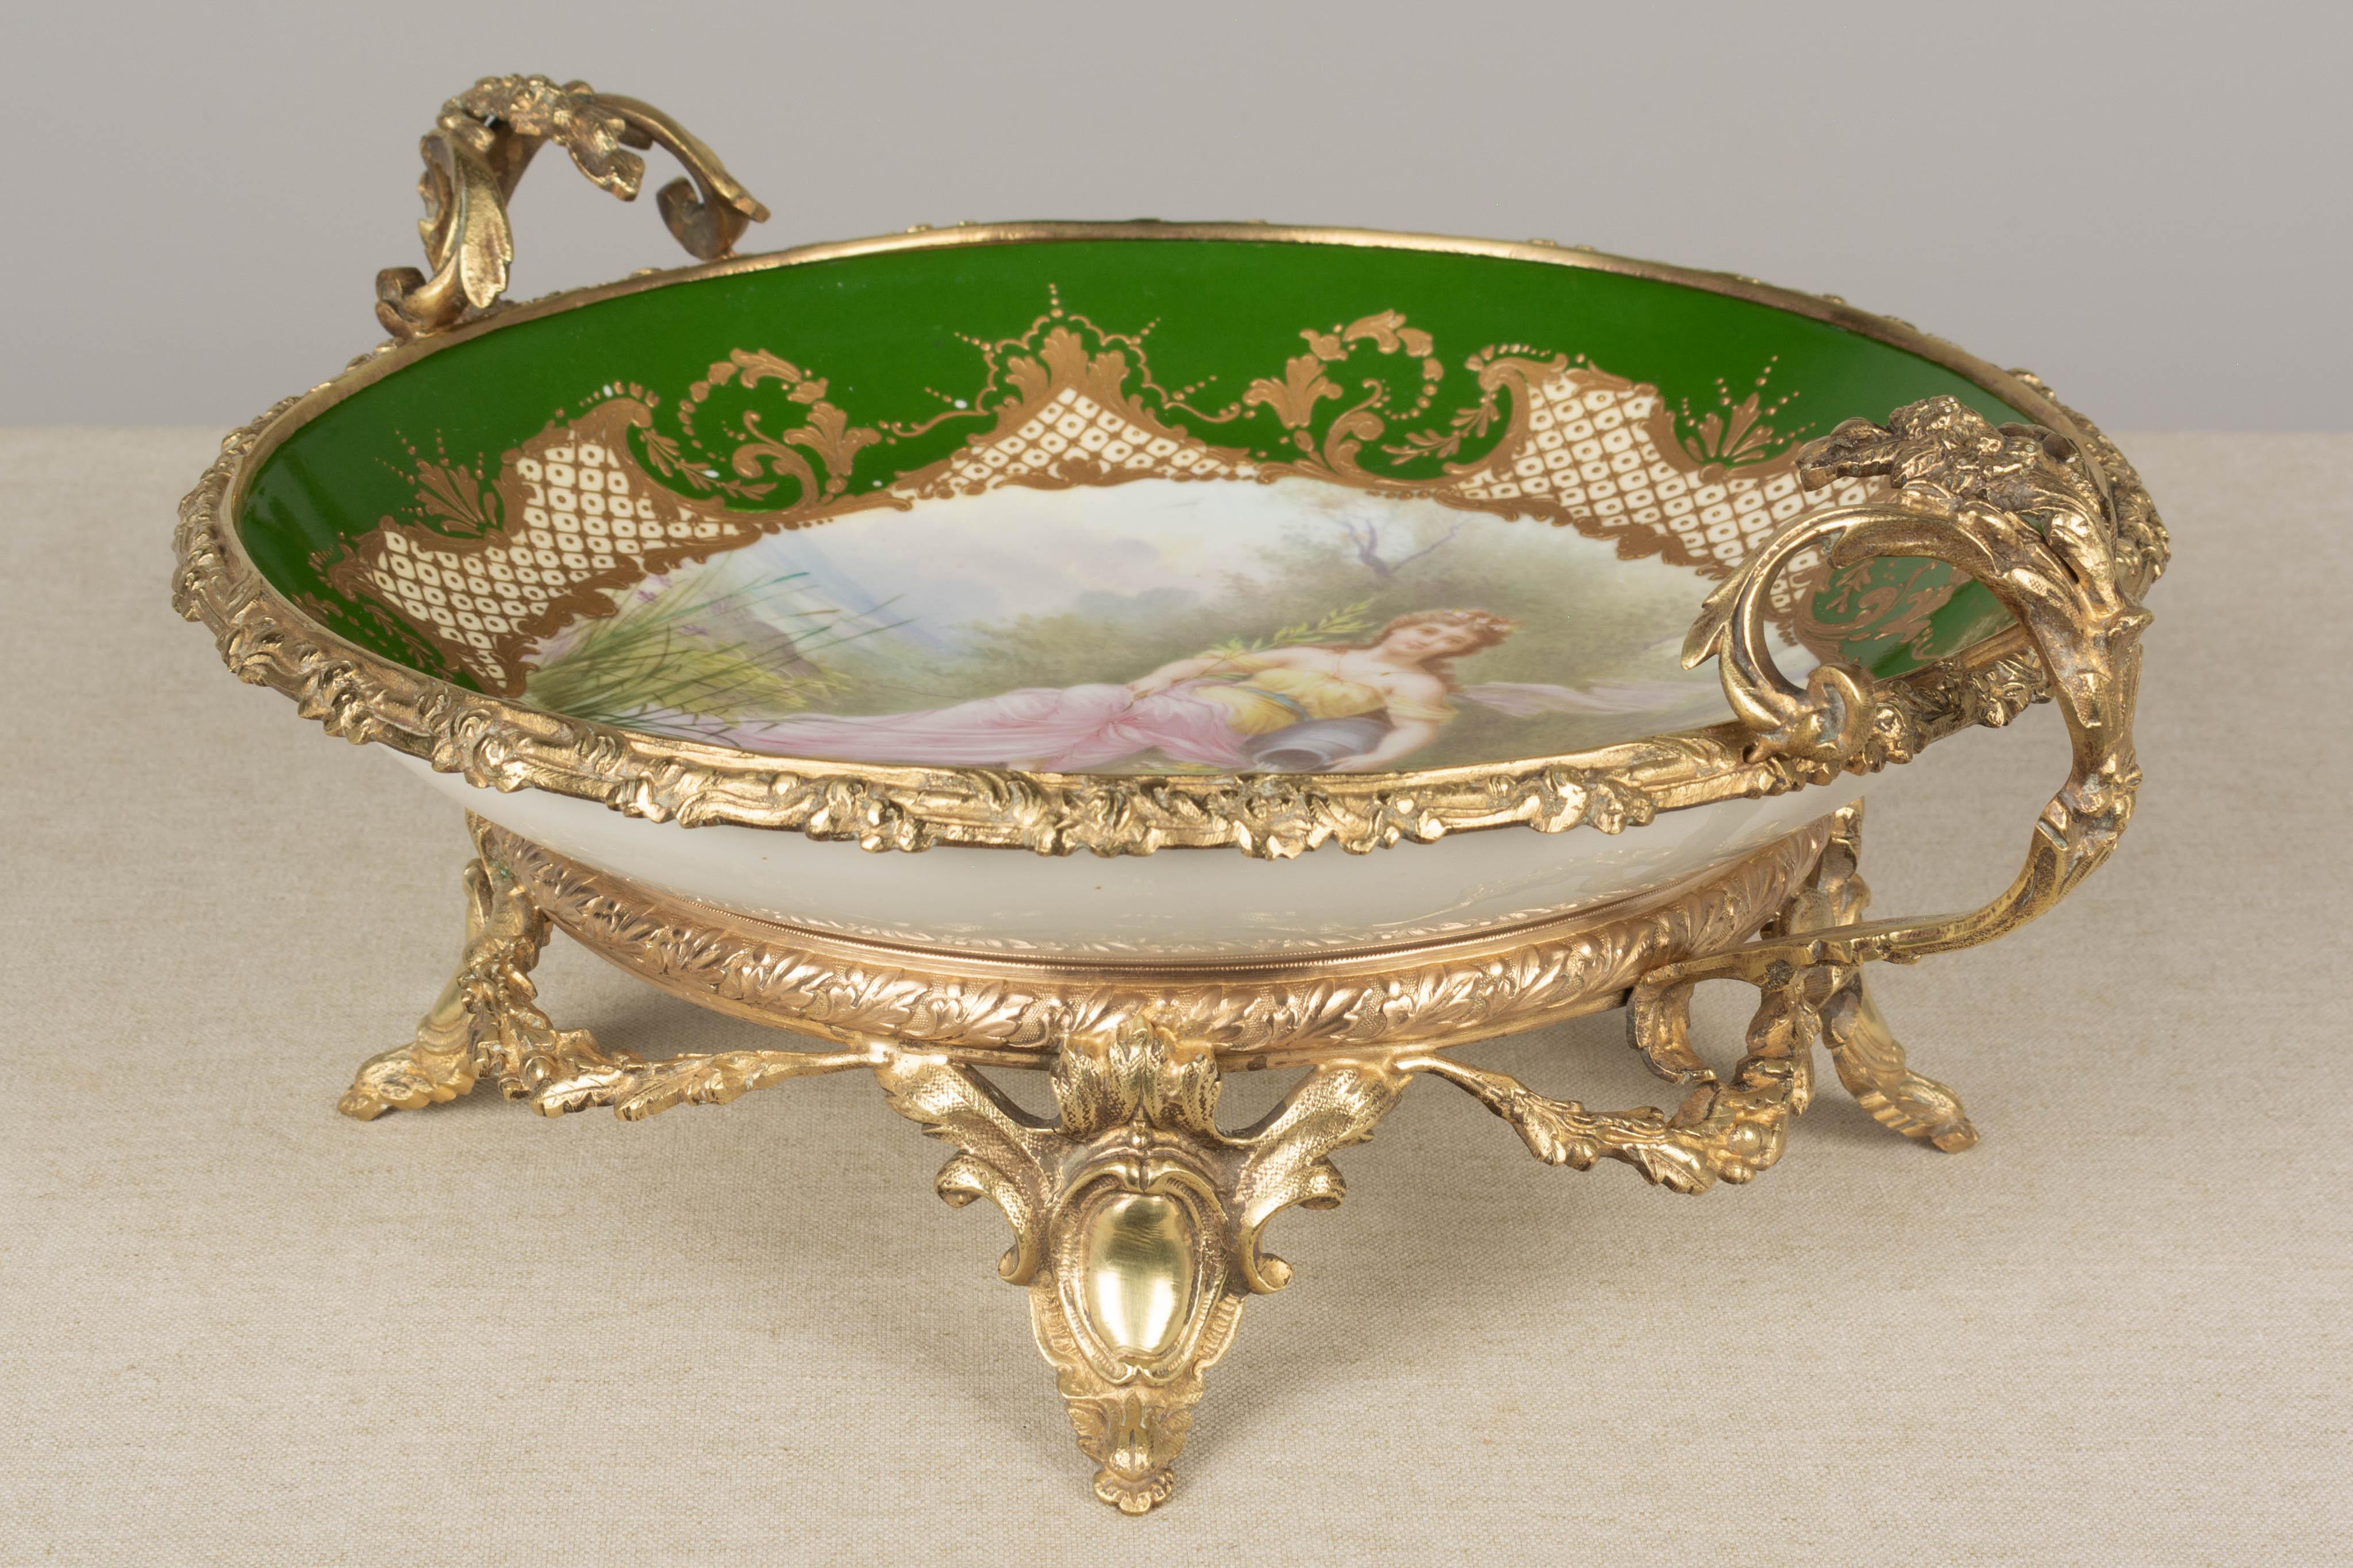 19th Century French Ormolu Sèvres Porcelain Centerpiece Bowl In Good Condition For Sale In Winter Park, FL